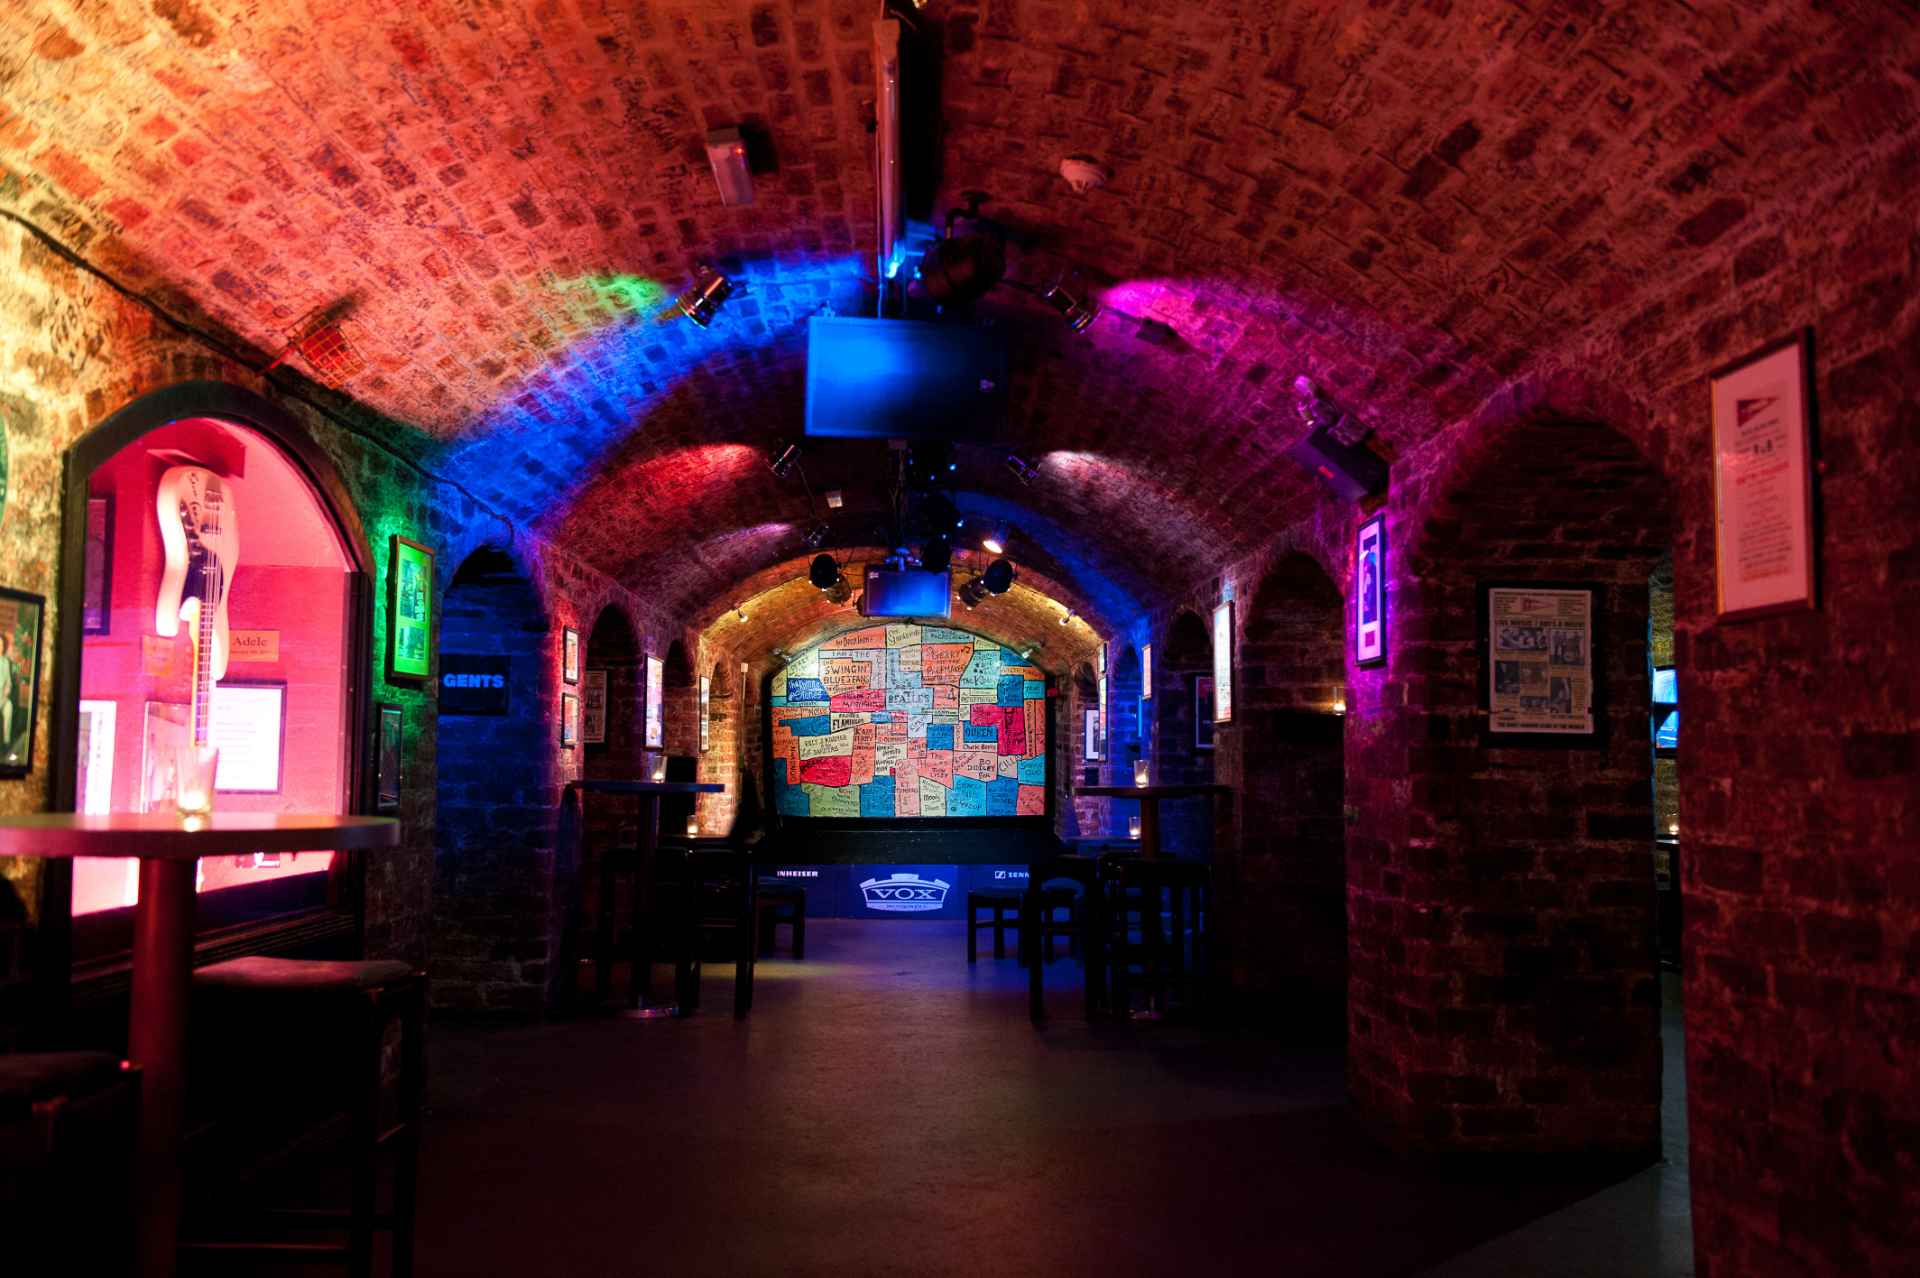 inside-of-the-cavern-club-stage-lit-up-in-neon-lights